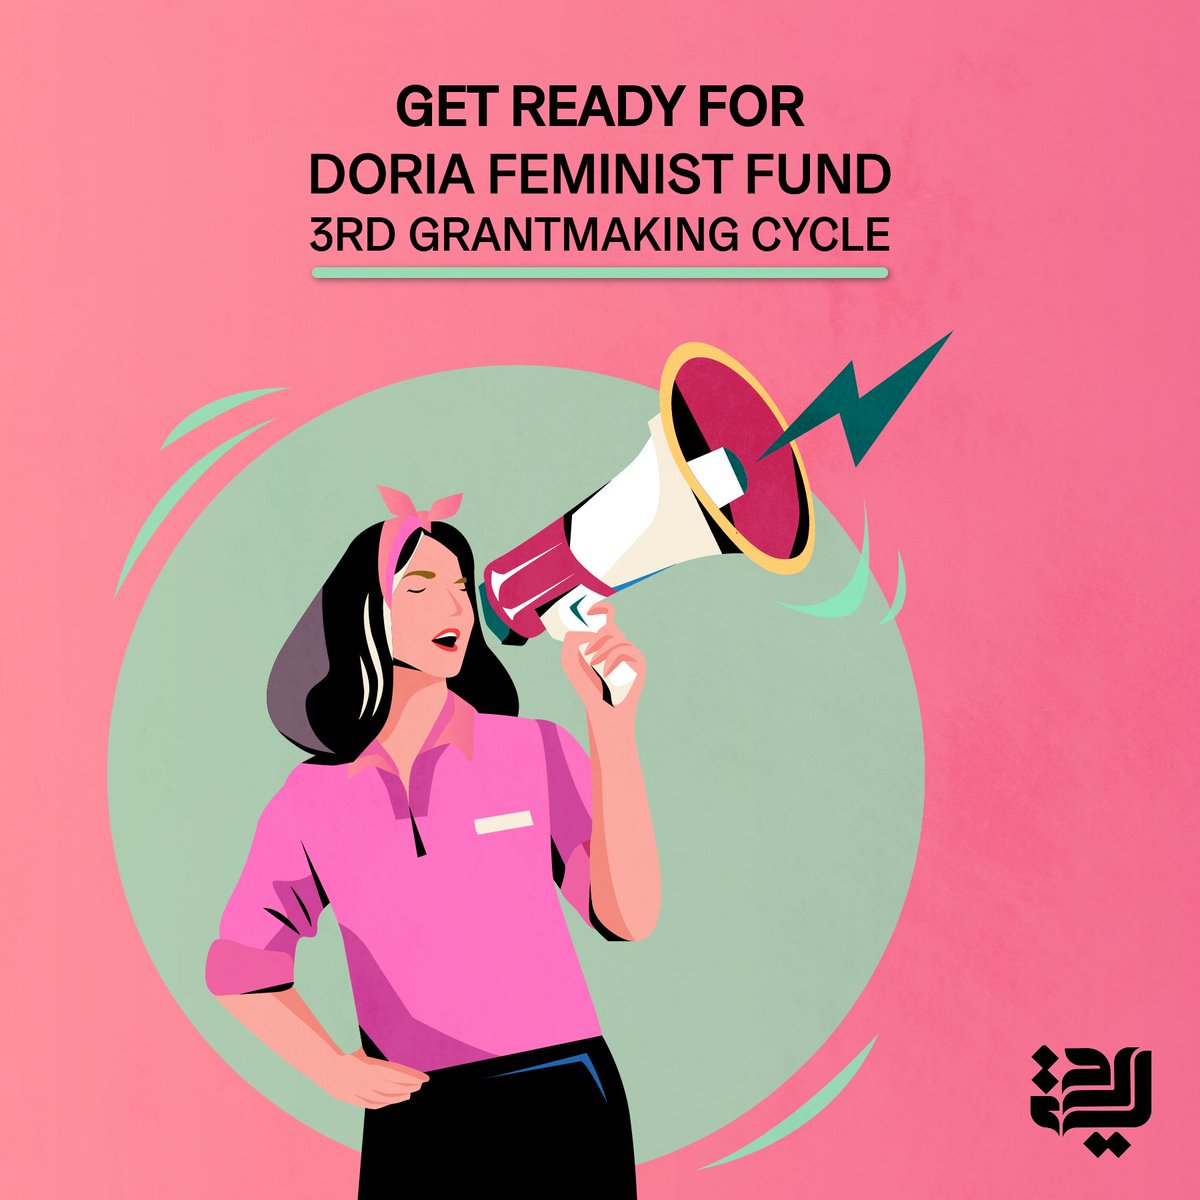 The Call for proposals for Doria Feminist Fund 3rd Grantmaking Cycle will be opened soon! Stay Tuned!

#women #womenempowerment #WomensRights #funding #Feminism